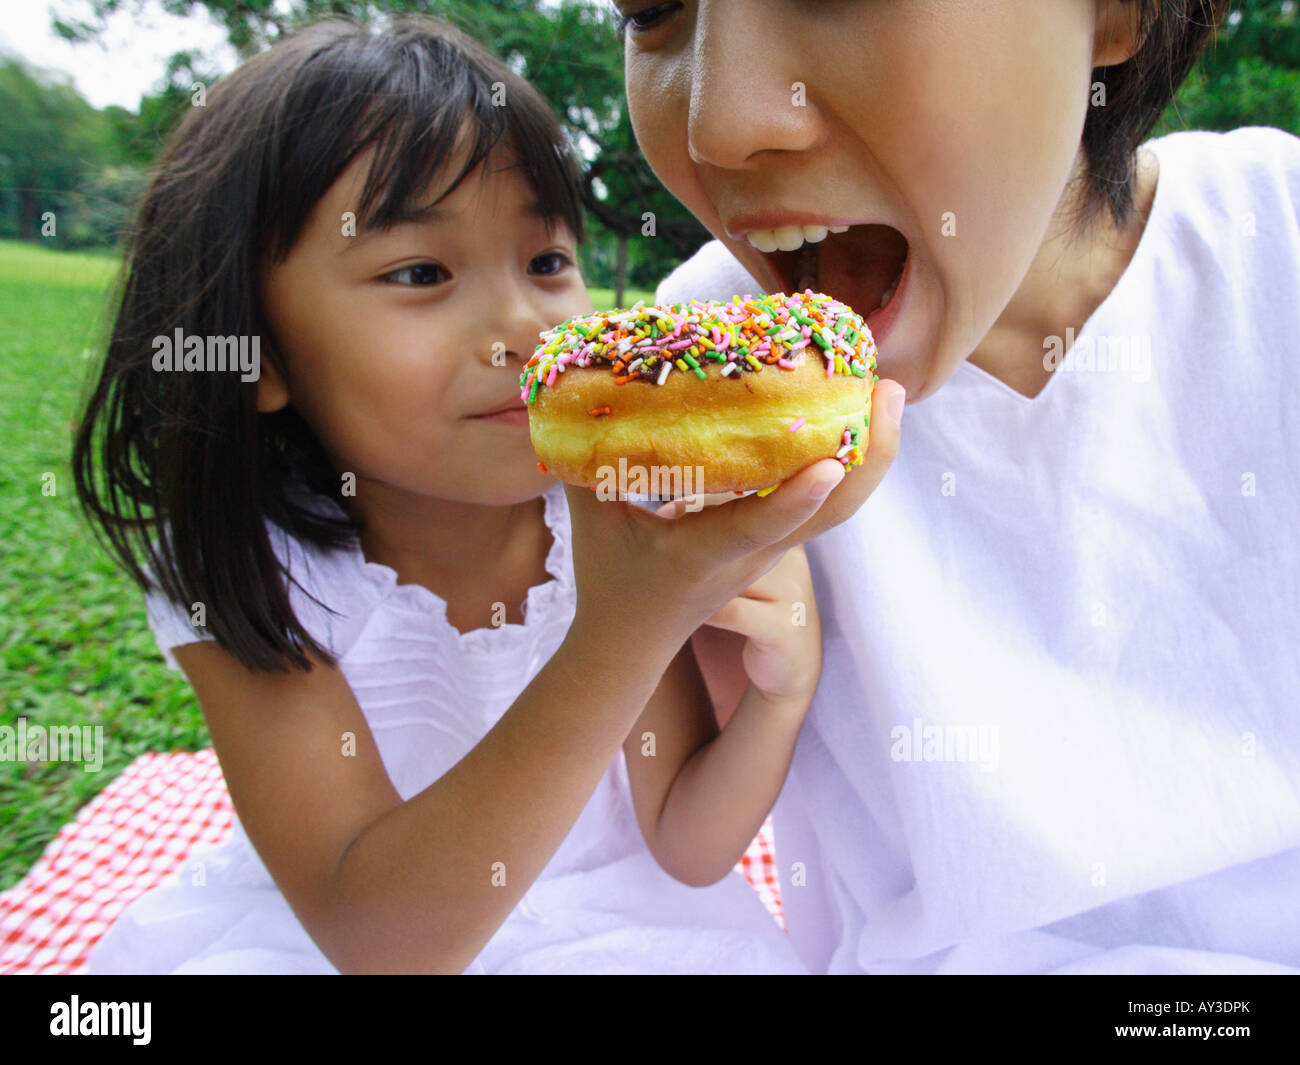 Close-up of a girl feeding a donut to her mother Stock Photo